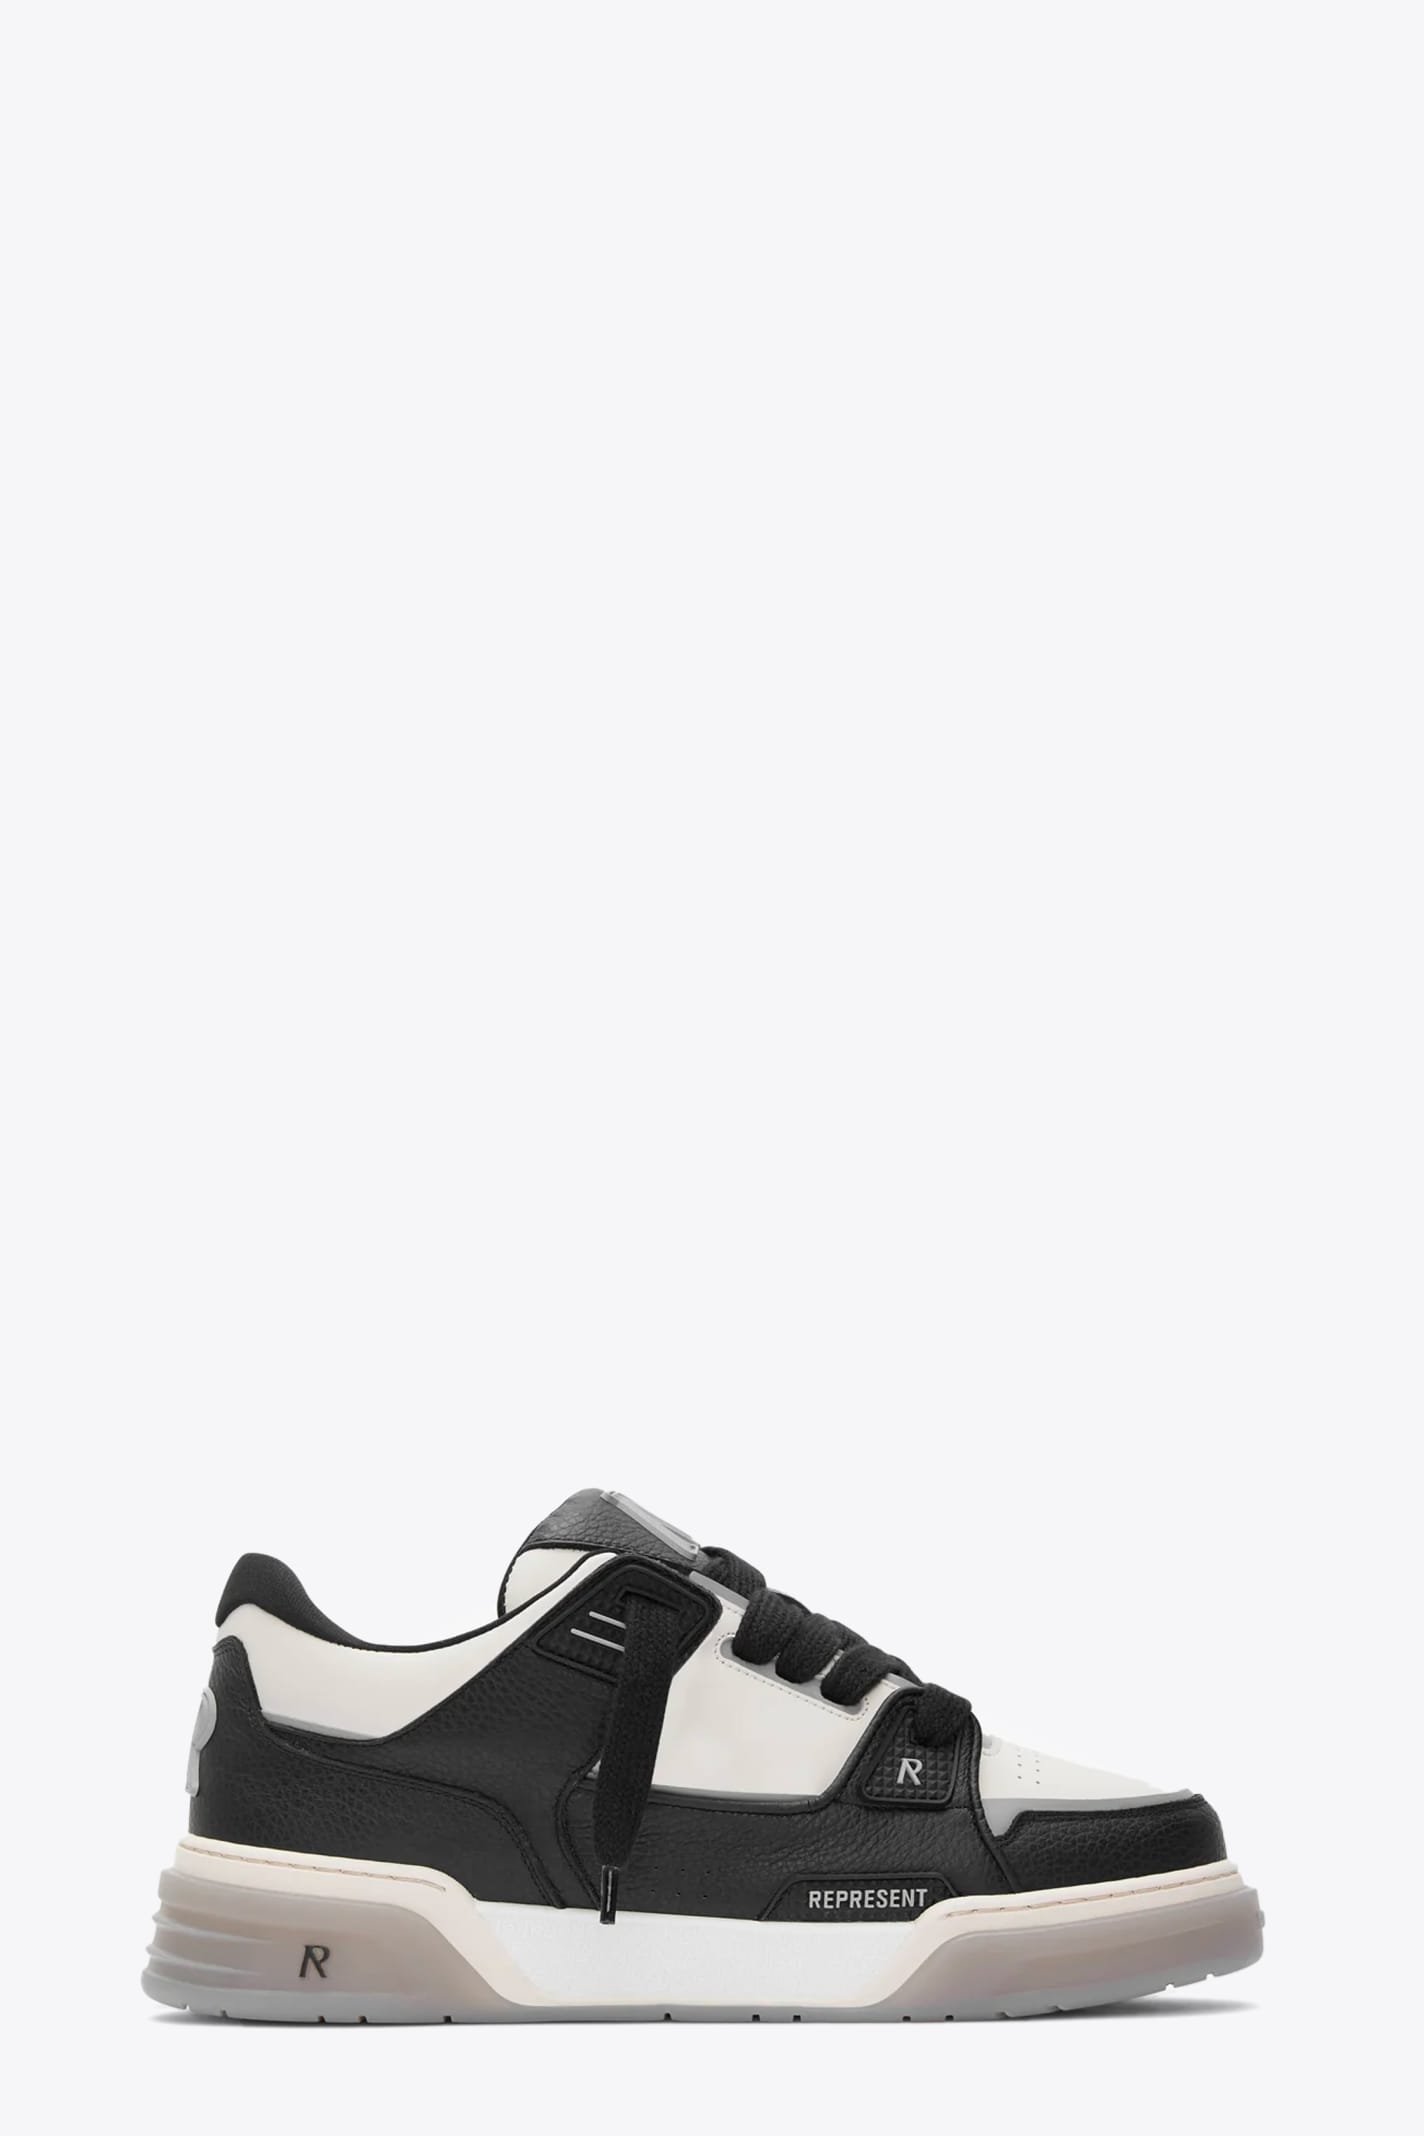 Studio Sneaker Off white and black leather low chunky sneaker - Studio sneaker